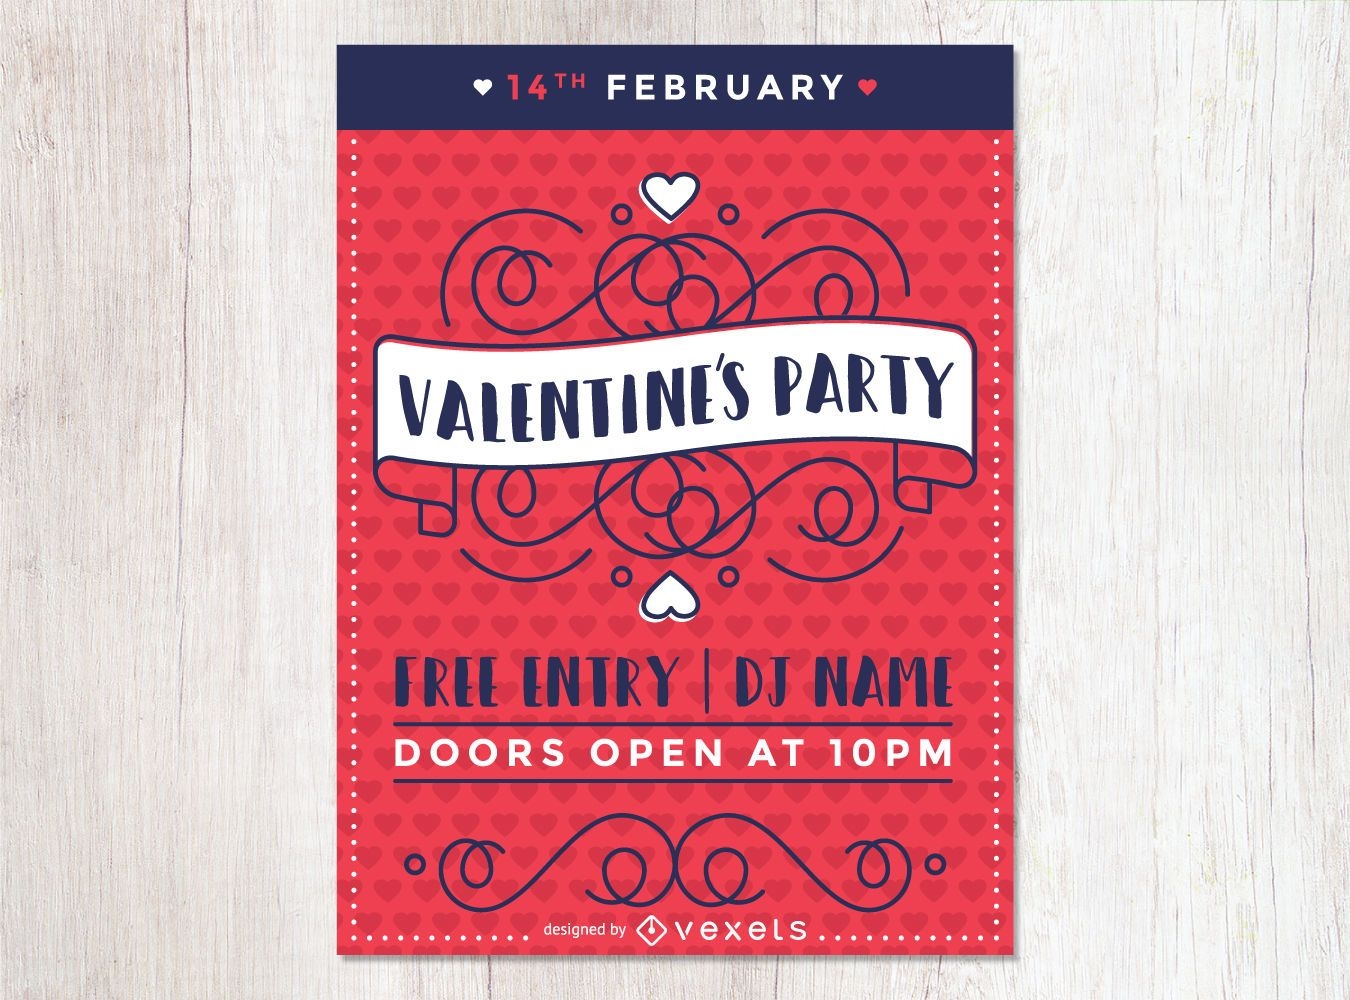 Flat Valentine's Day party flyer